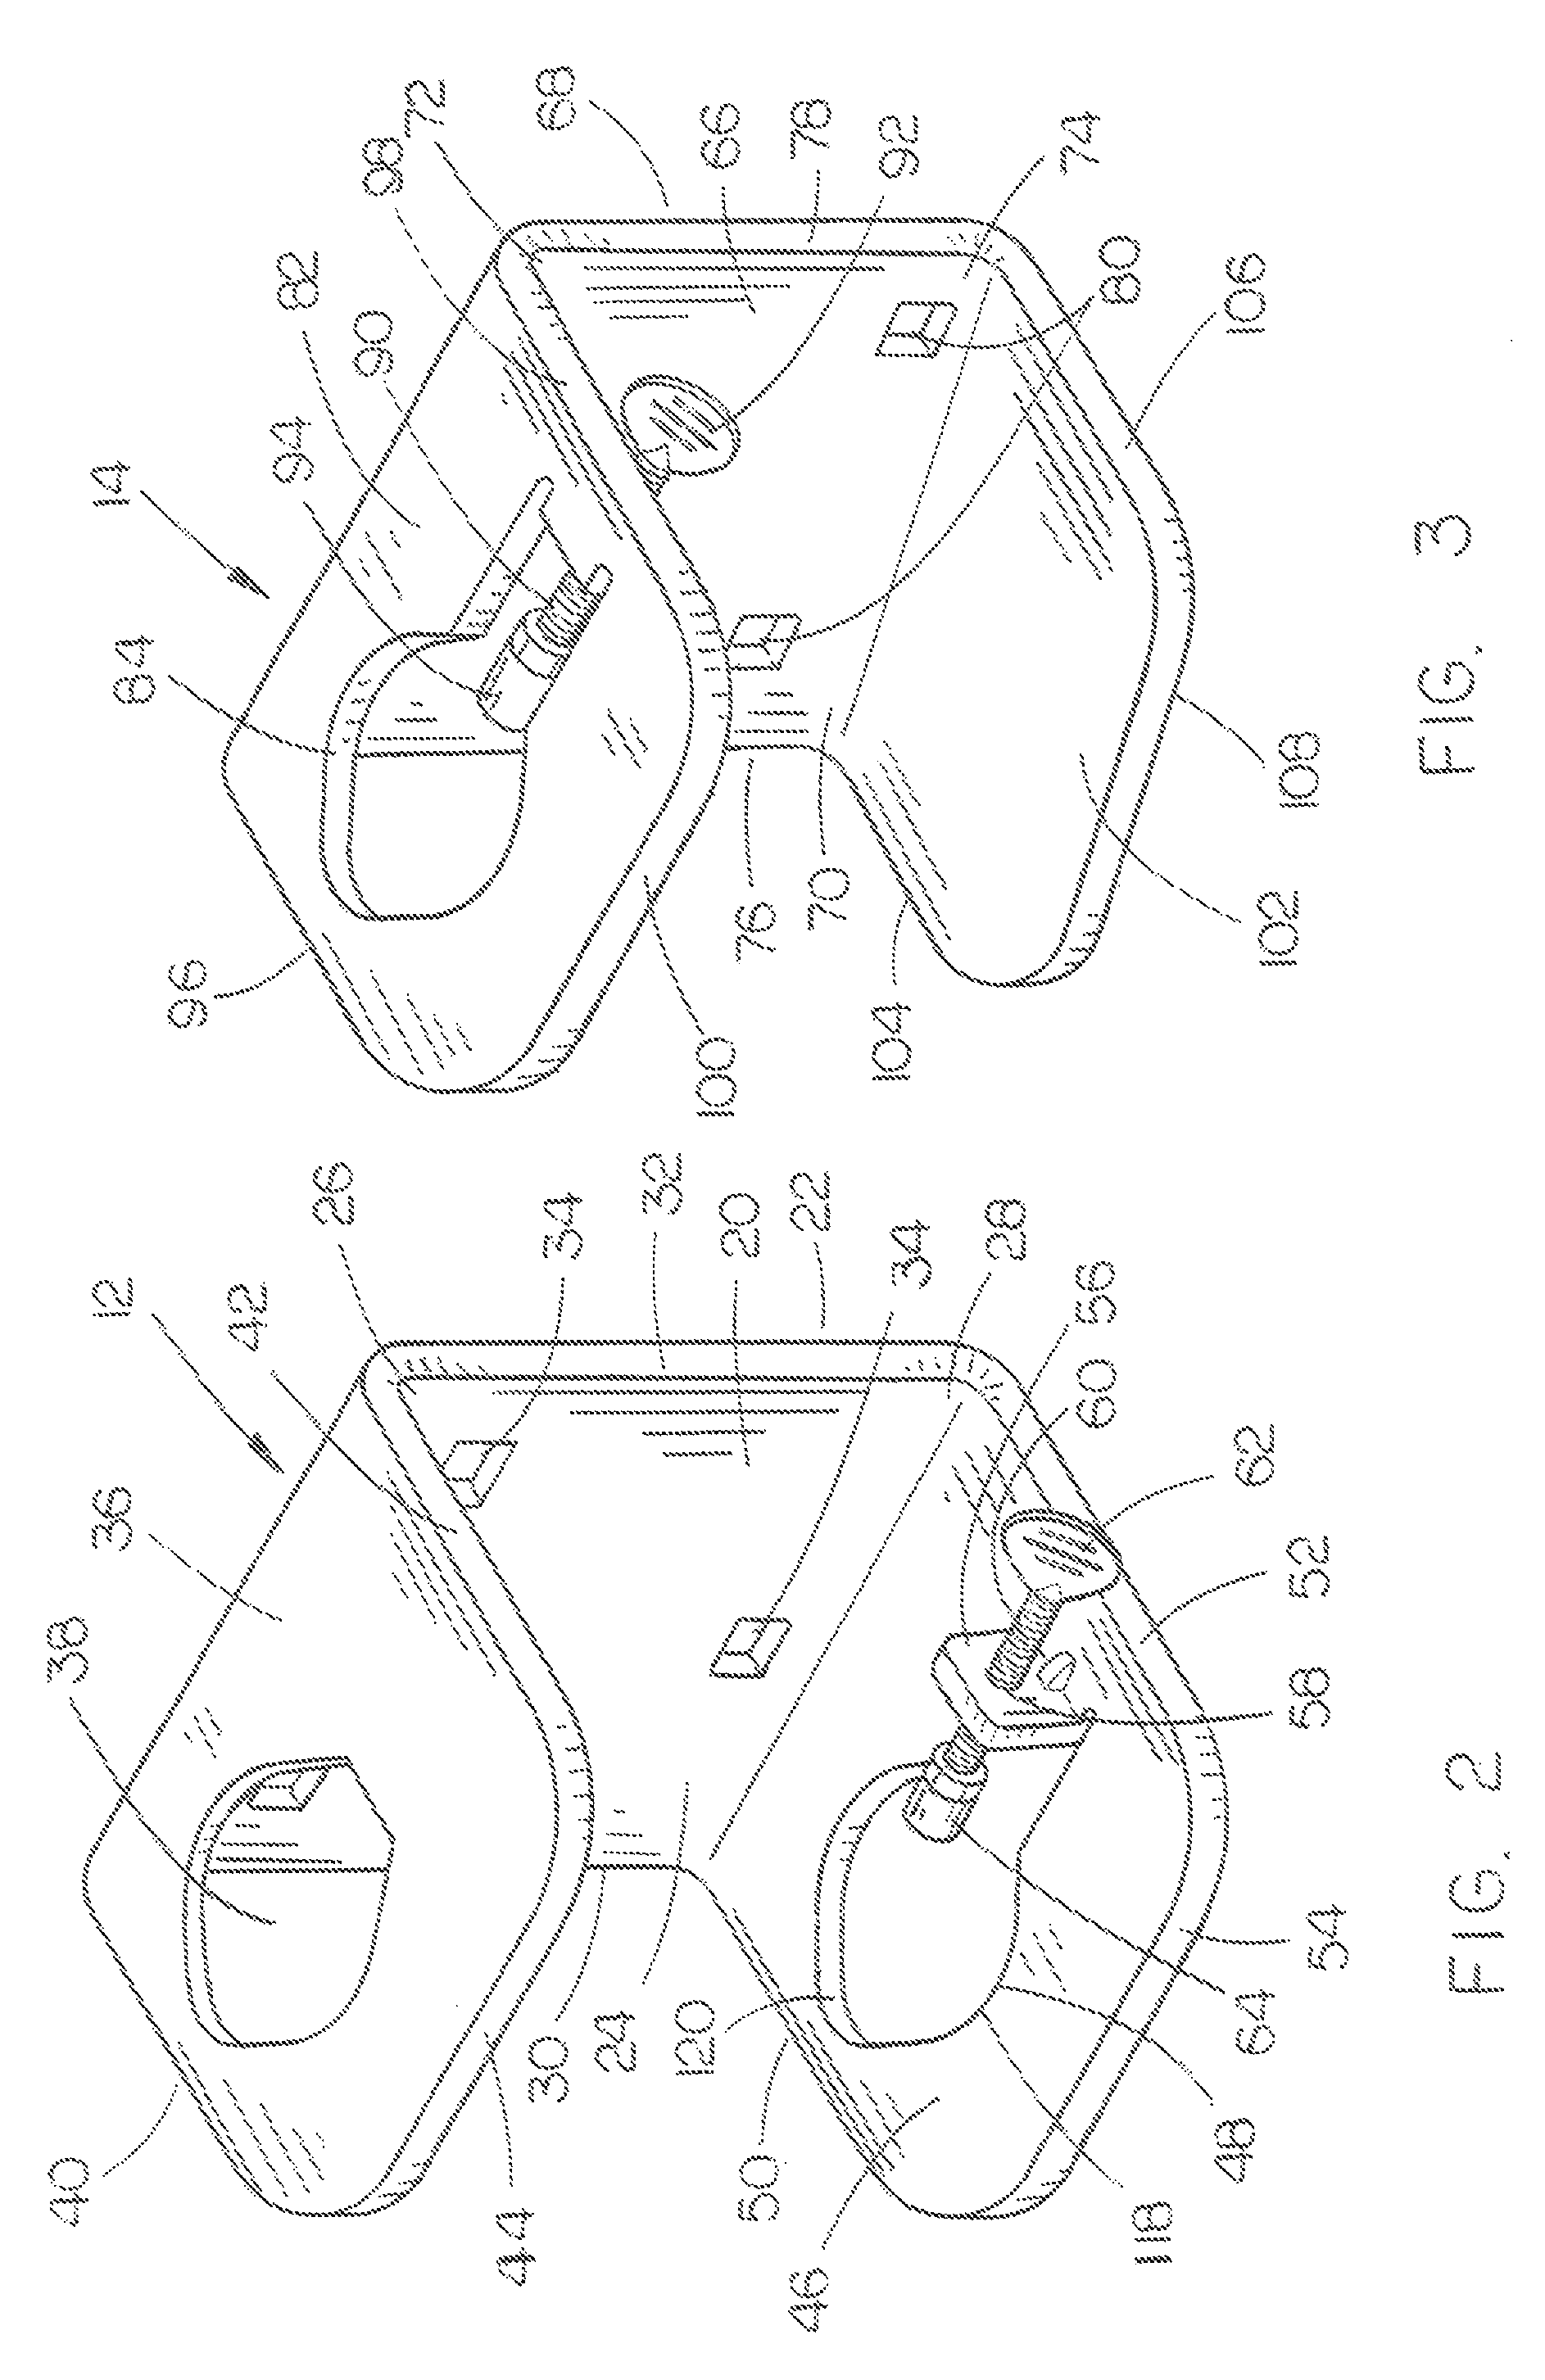 Bracket assembly for mounting a vertically disposed support member